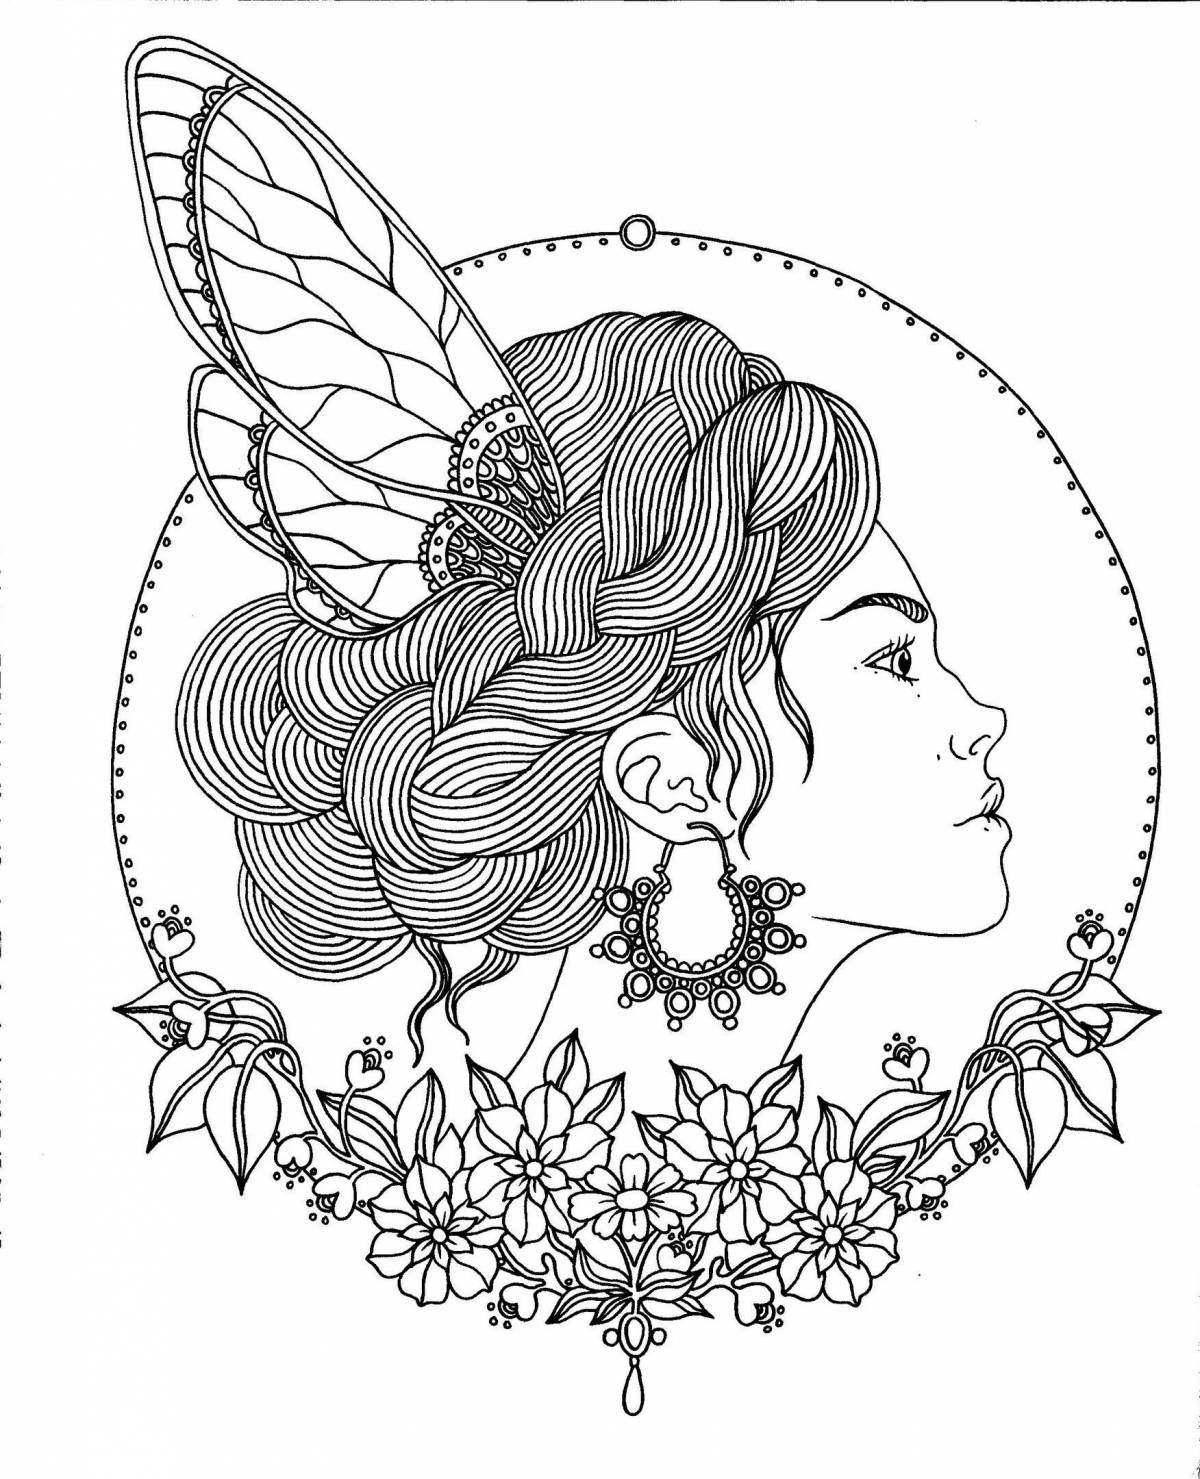 Relaxing anti-stress coloring book for women